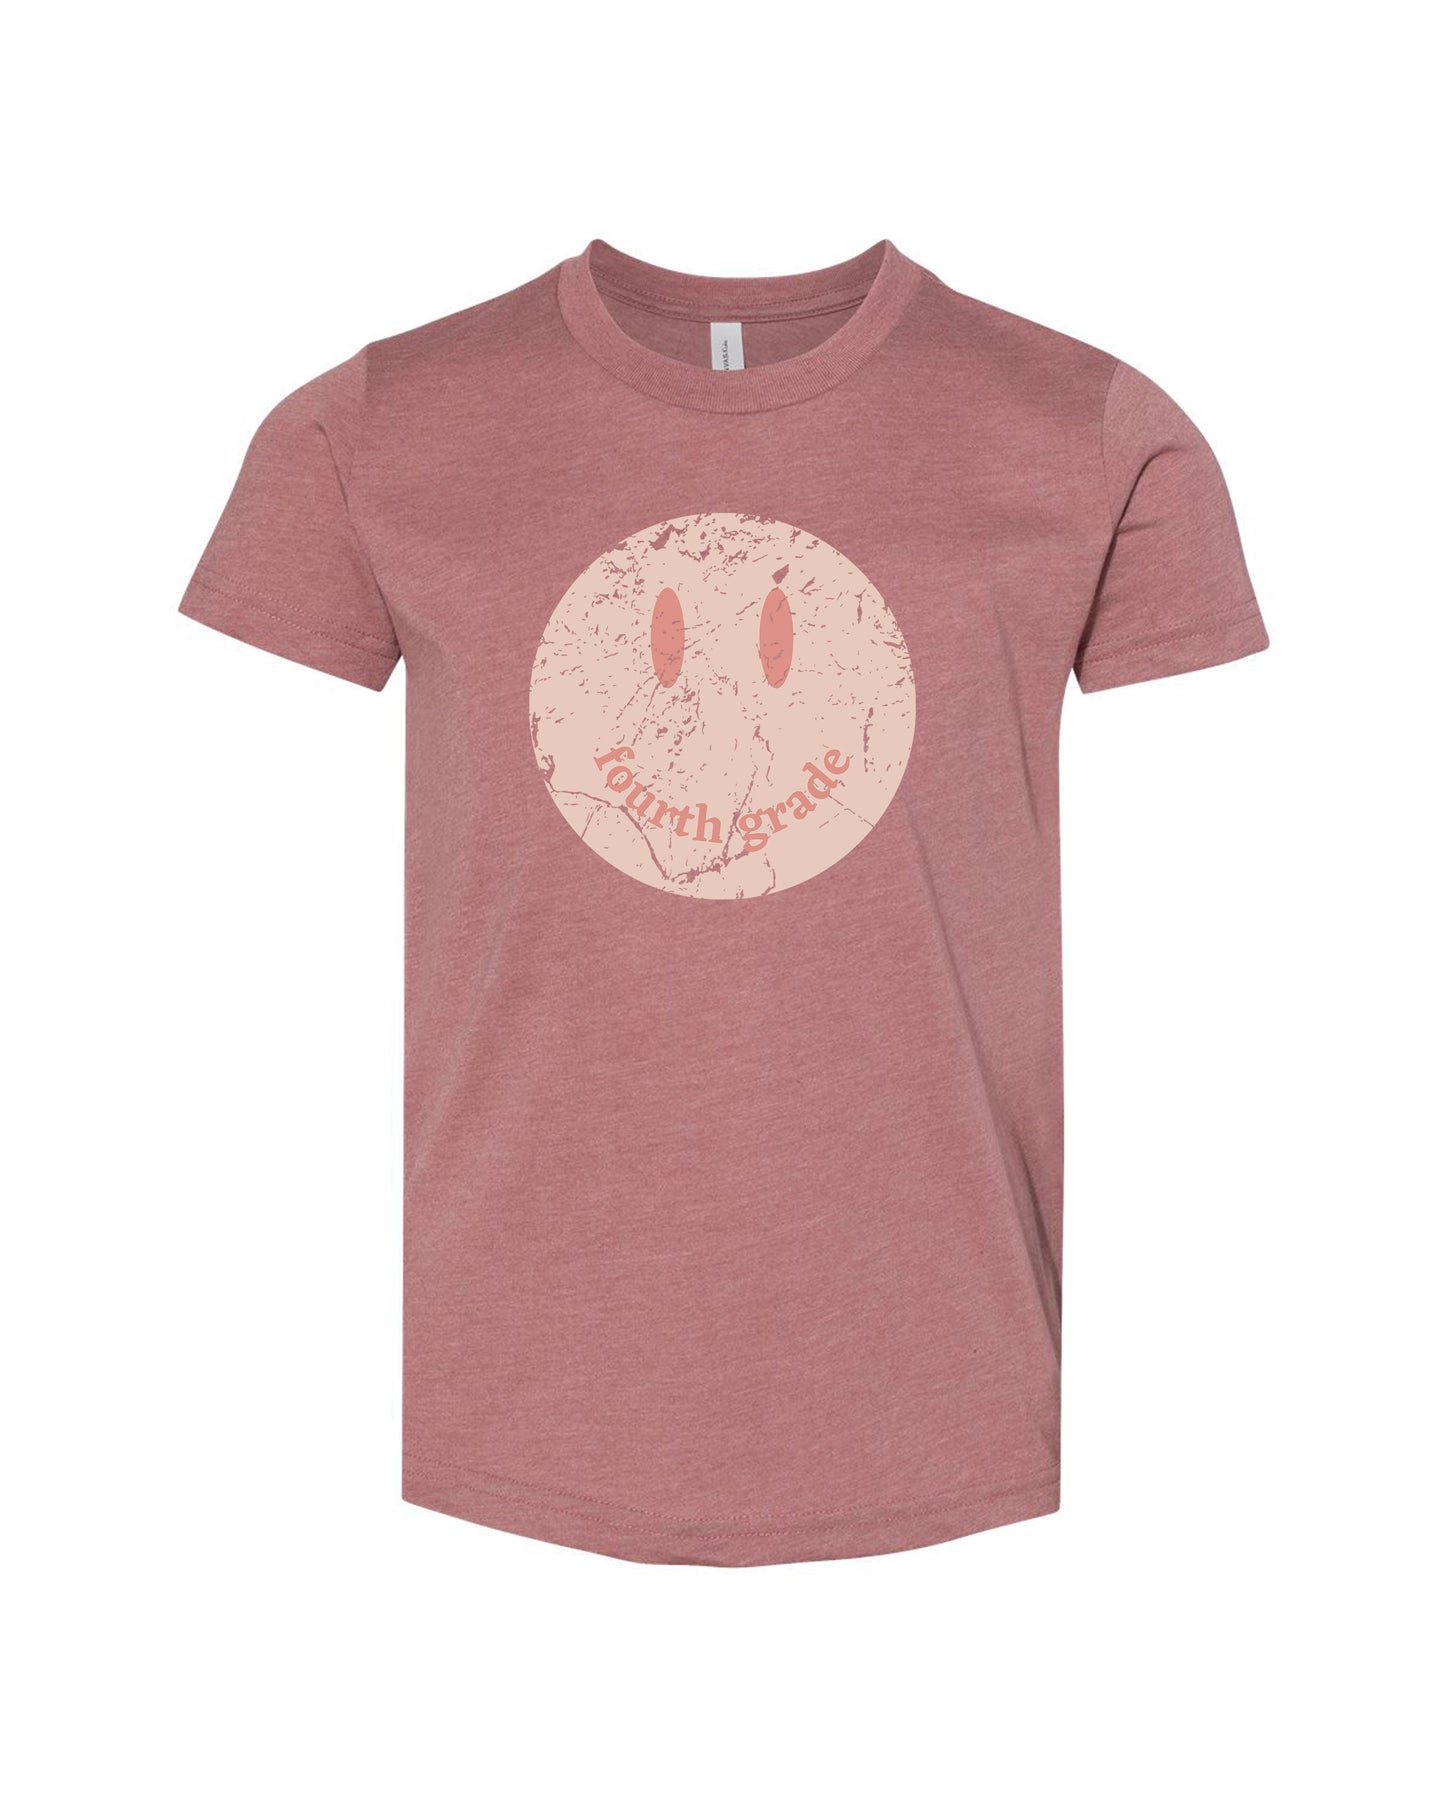 Happy Face Grade | Girls Tee-Kids Tees-Sister Shirts-Sister Shirts, Cute & Custom Tees for Mama & Littles in Trussville, Alabama.